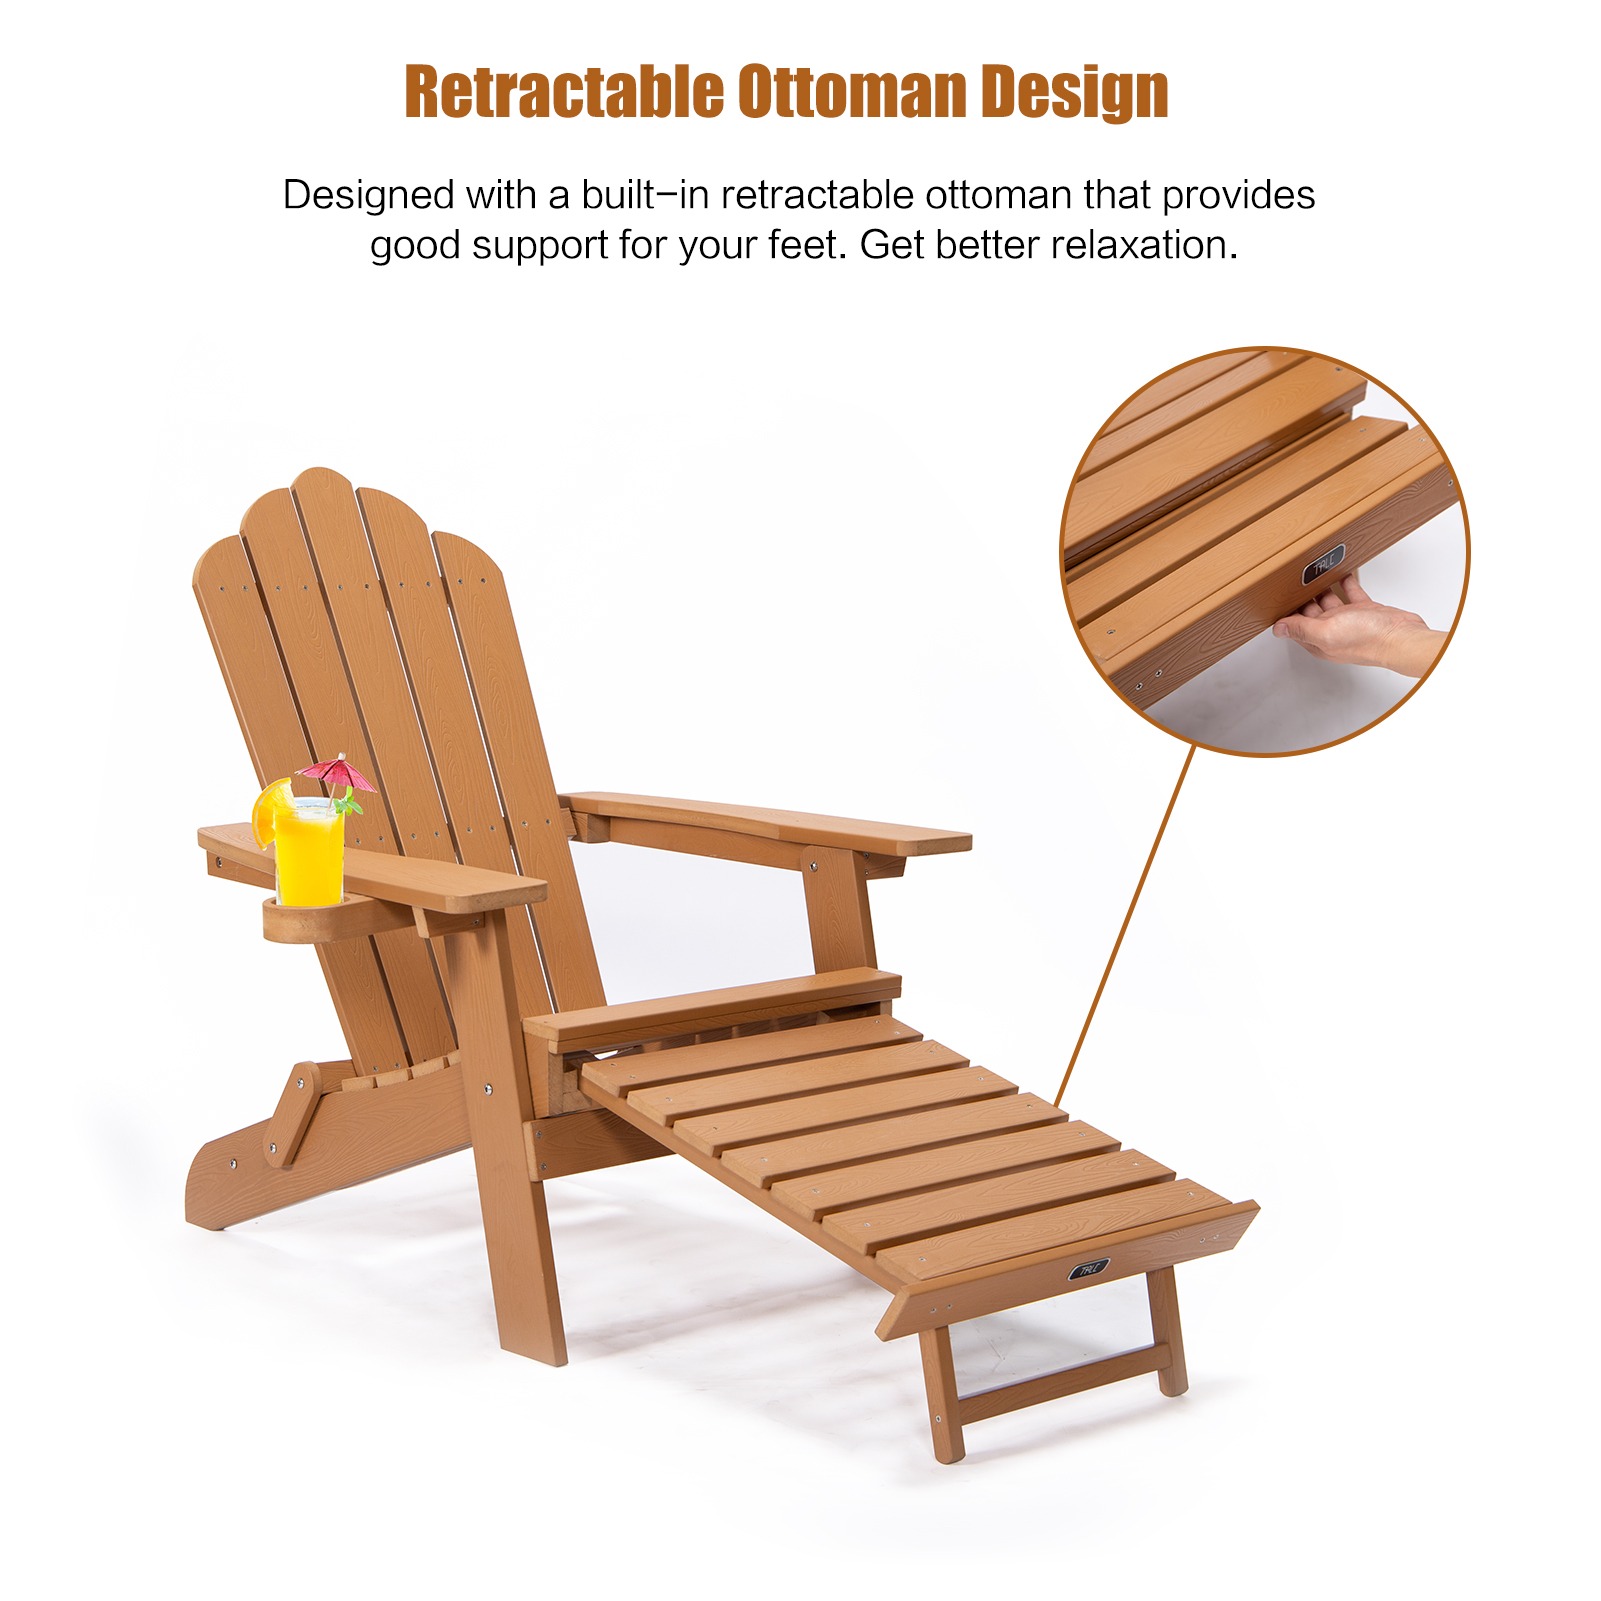 Branax Folding Adirondack Chair, Patio Chairs, Lawn Chair, Outdoor Chairs Painted Adirondack Chair Weather Resistant for Patio Deck Garden, Backyard Deck, 400 lbs Capacity Load, Brown - image 3 of 8